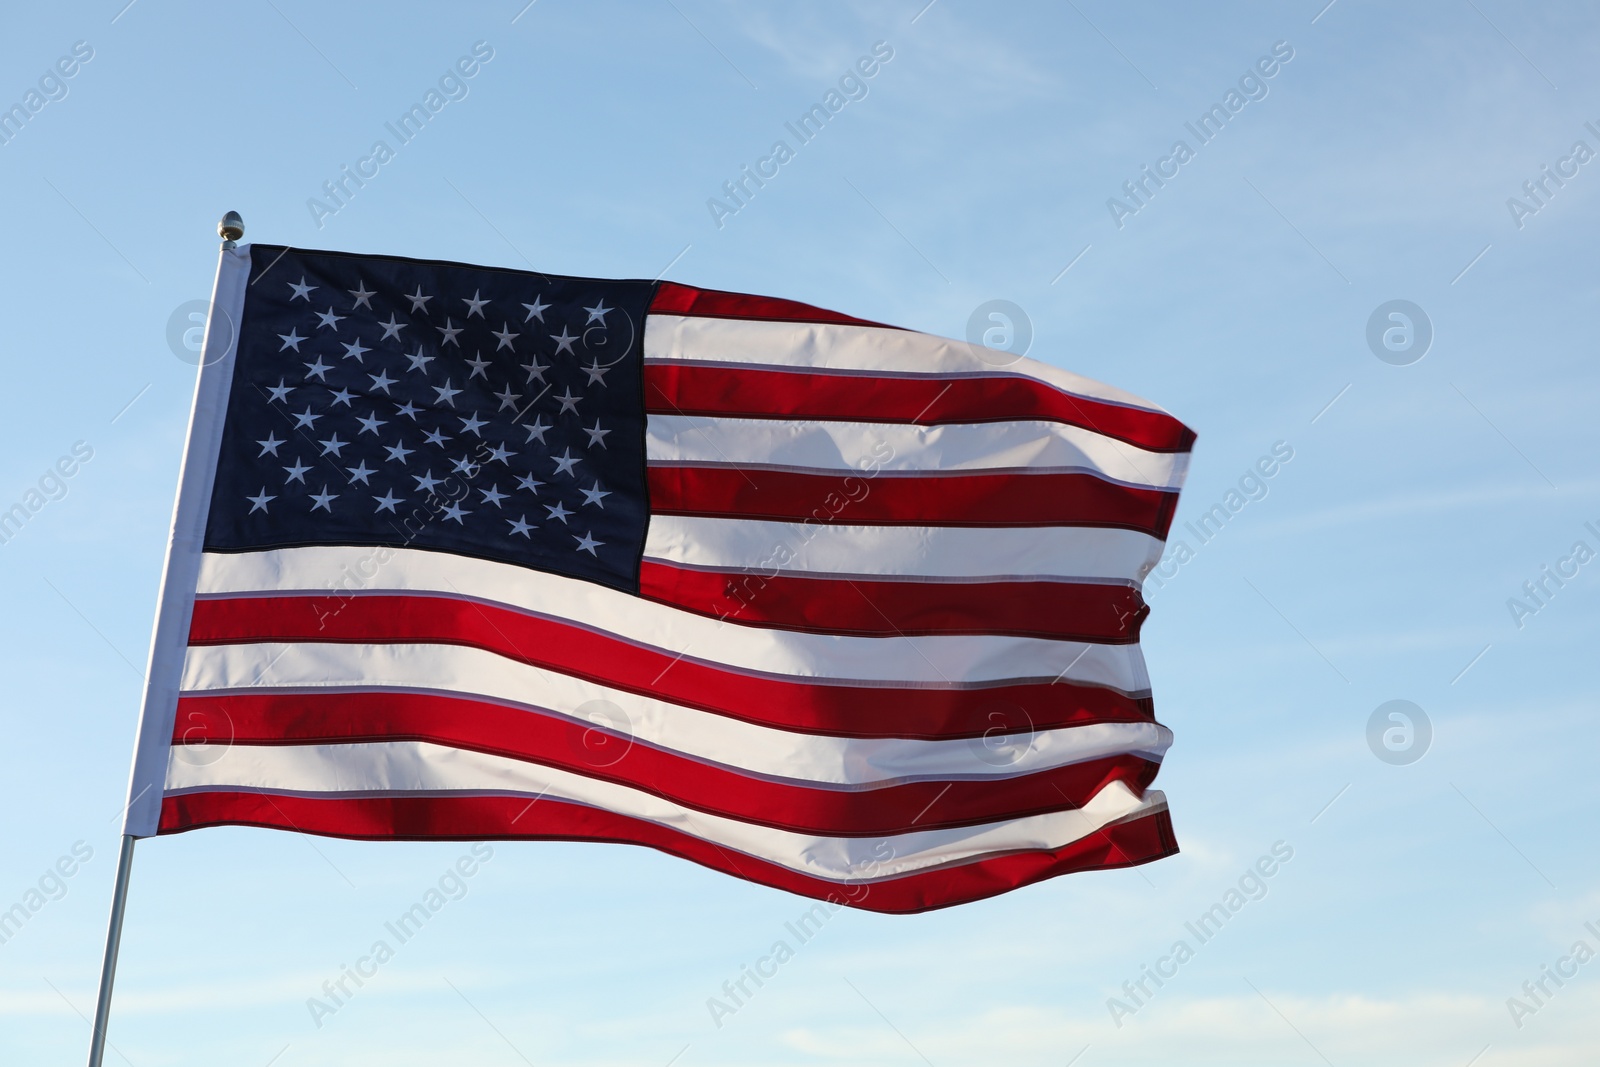 Photo of American flag fluttering outdoors on sunny day